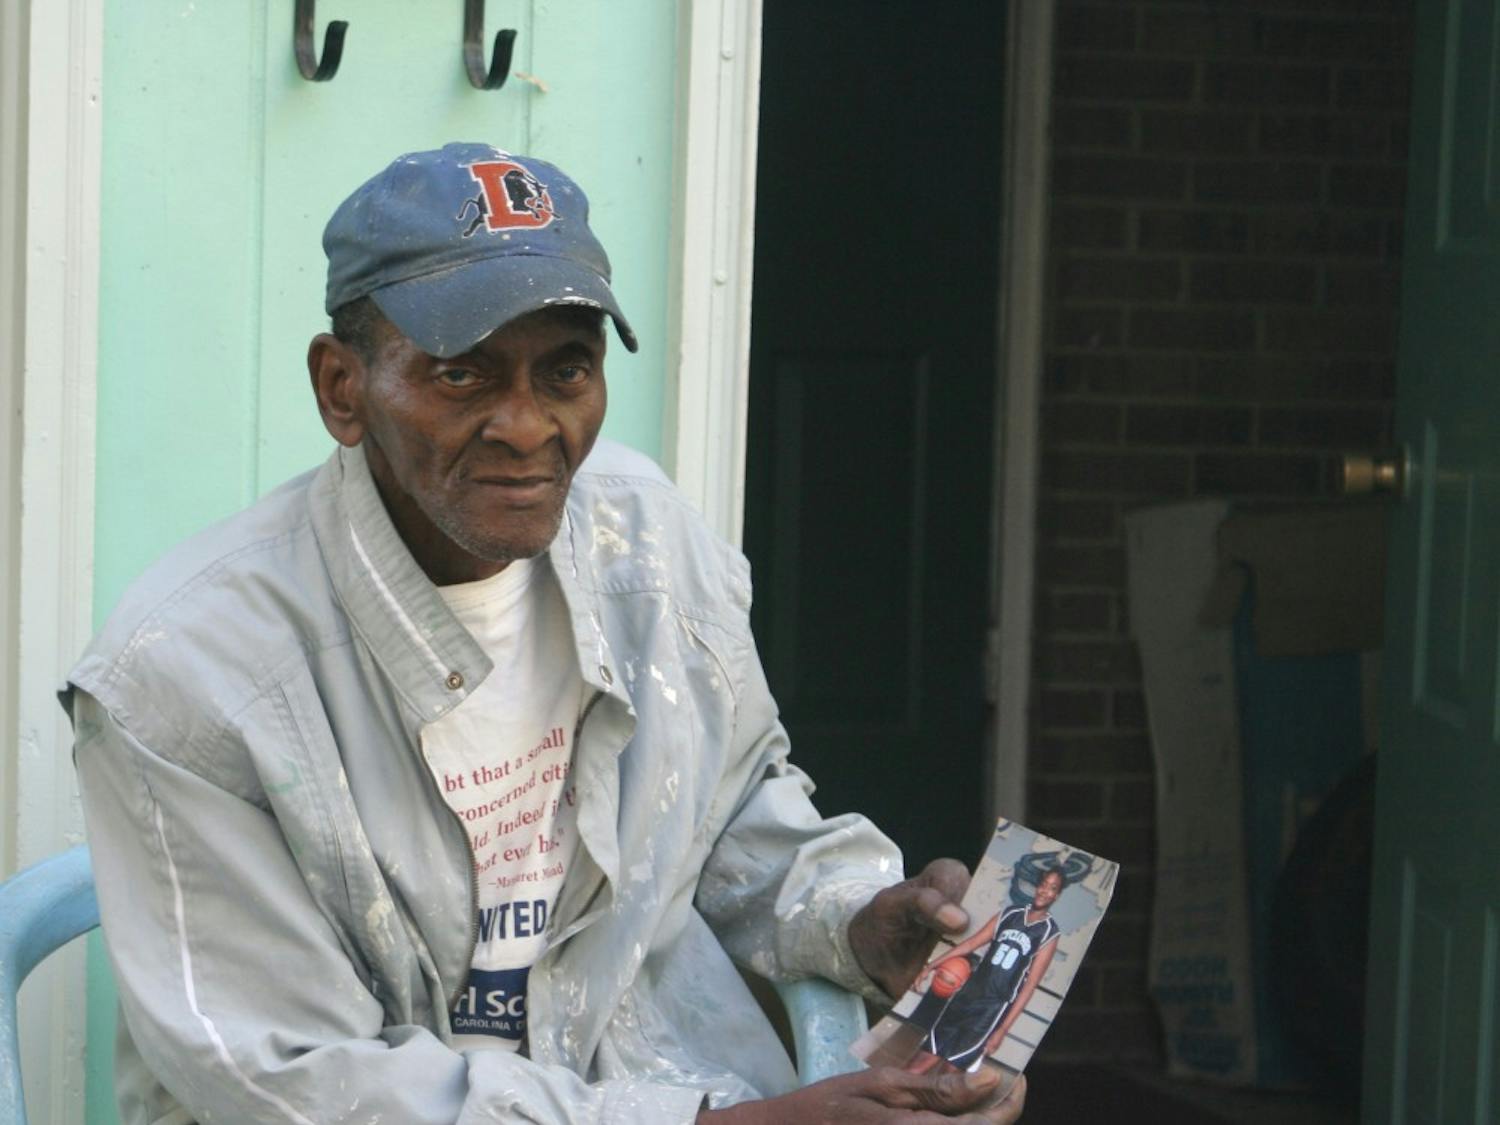 Walter Morrow (above) holds a photo of his 14-year-old daughter outside their home on Bynum Street.